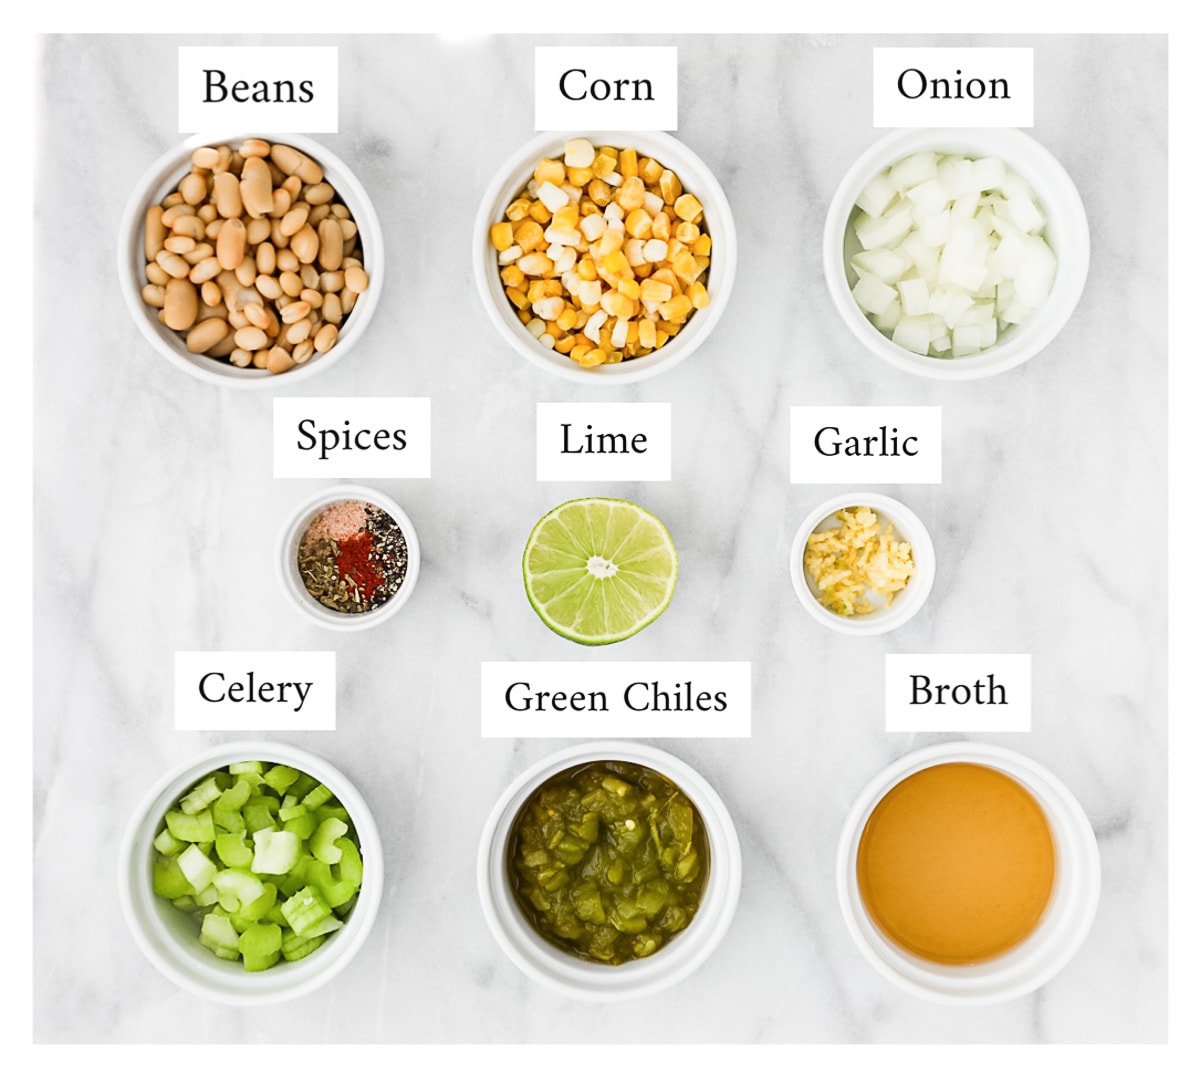 Small white bowls filled with labeled ingredients including: beans, corn, onion, spices, lime, garlic, celery, green chiles, and broth.